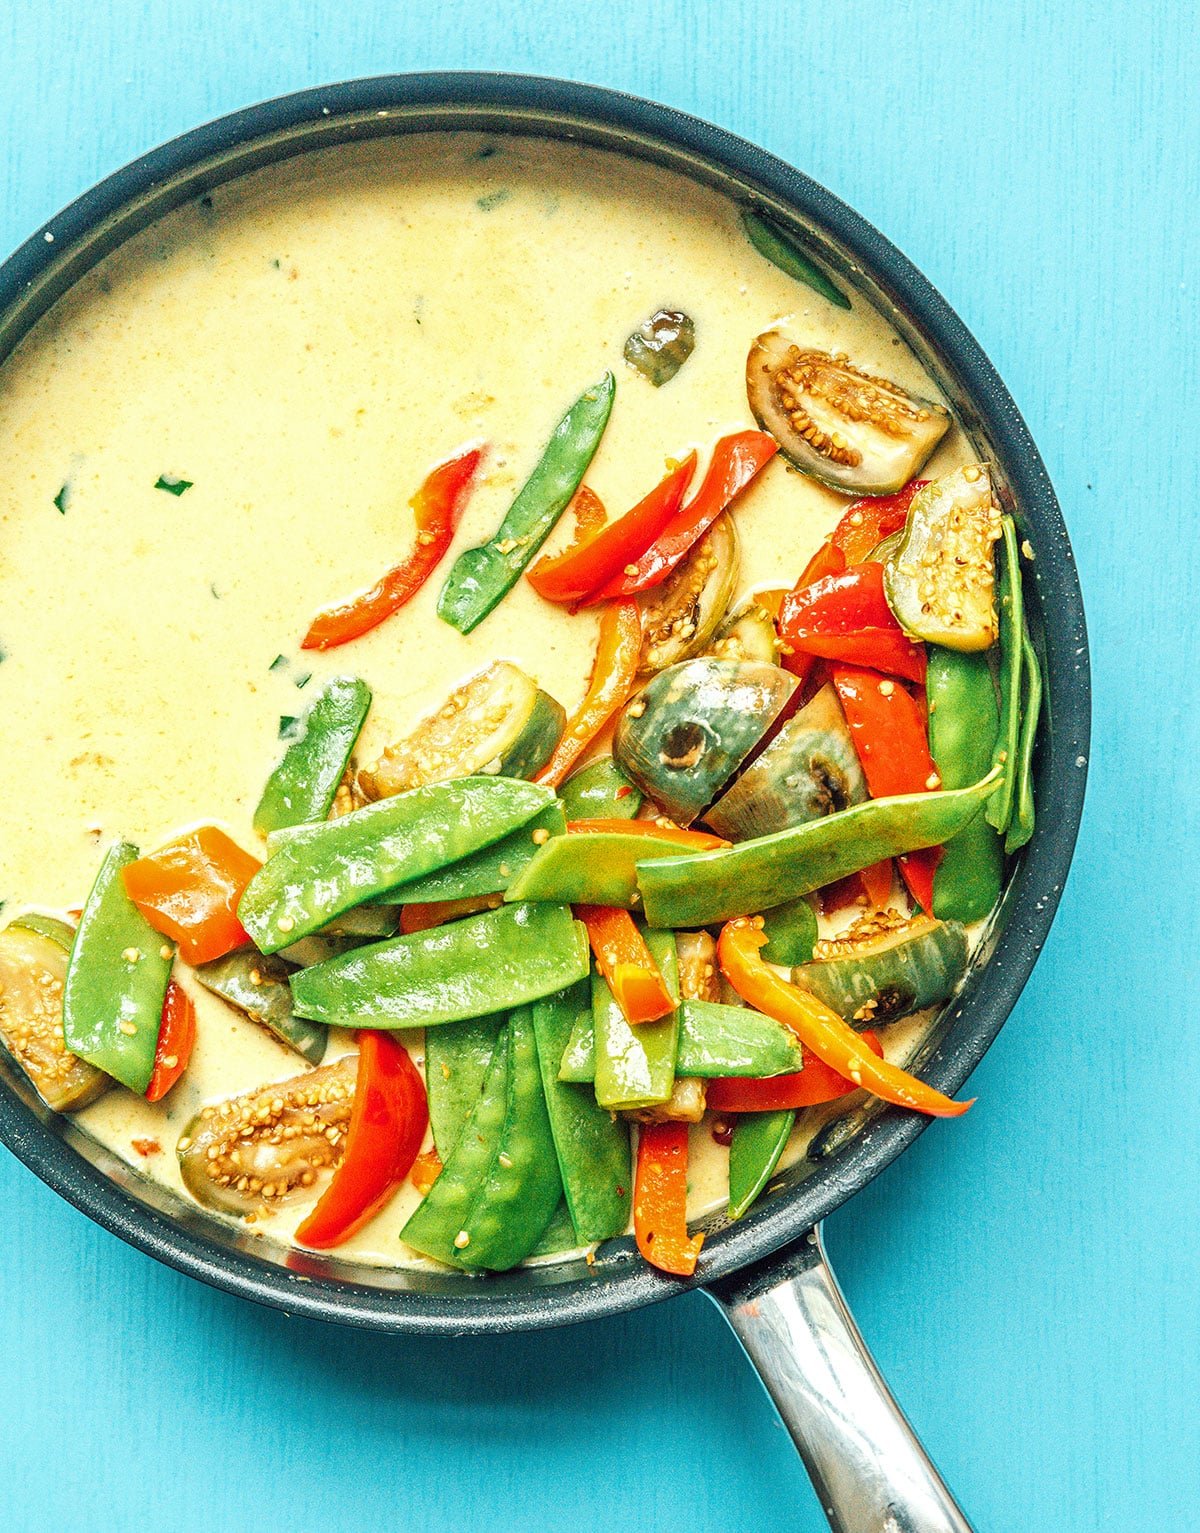 A skillet filled with vegetables and green curry sauce